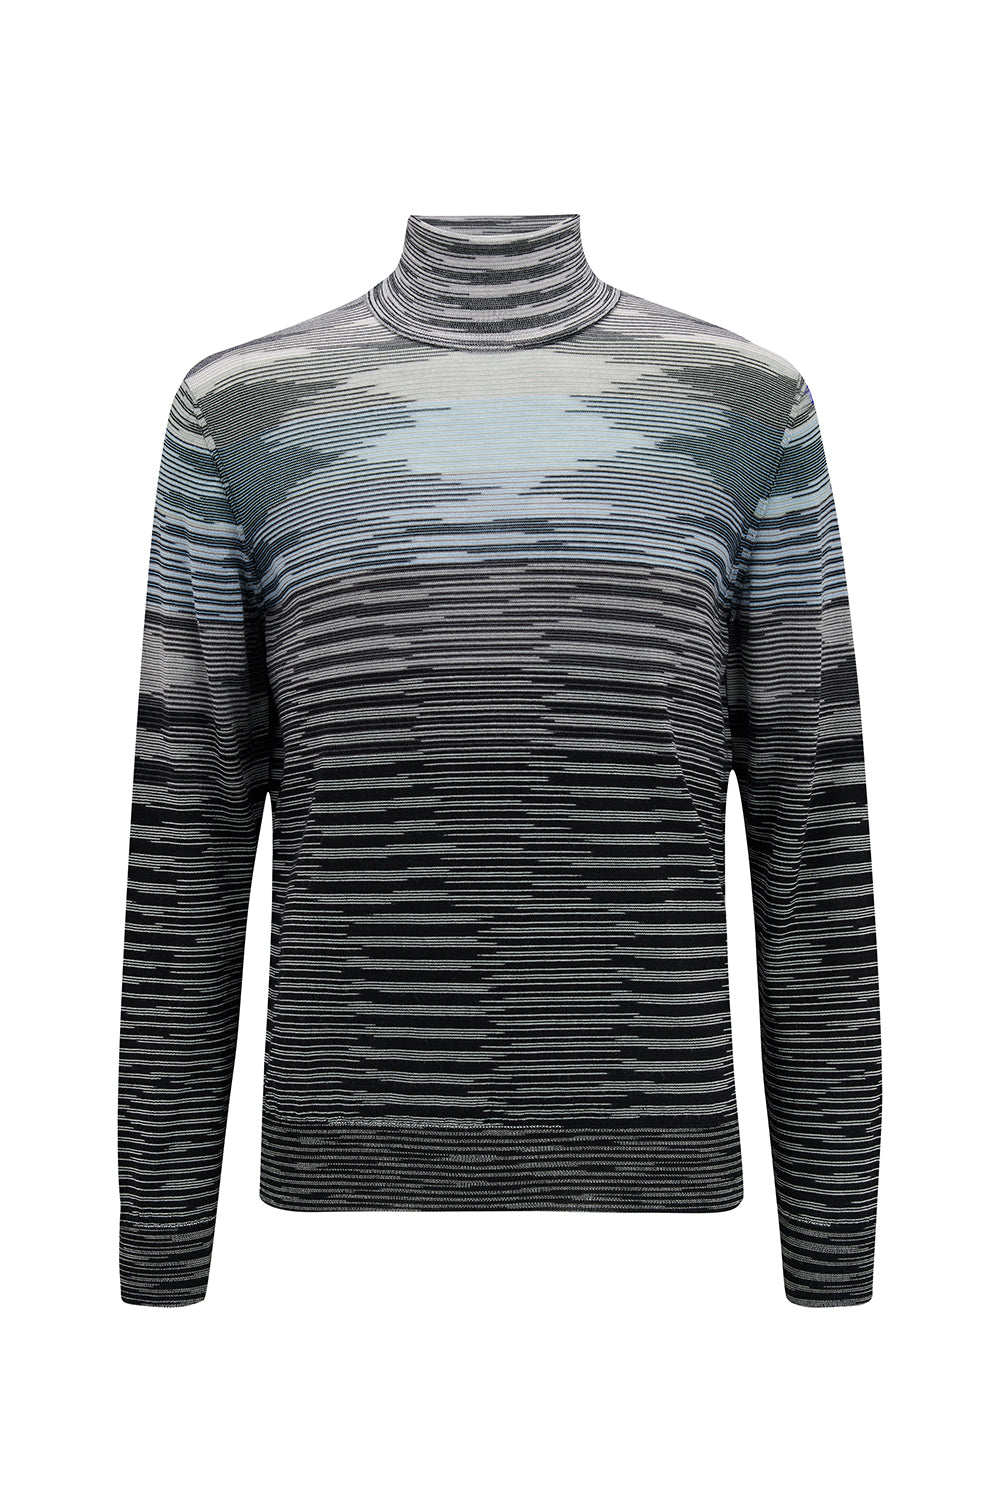 Missoni Space-dye Roll Neck Sweater Blue - Front View